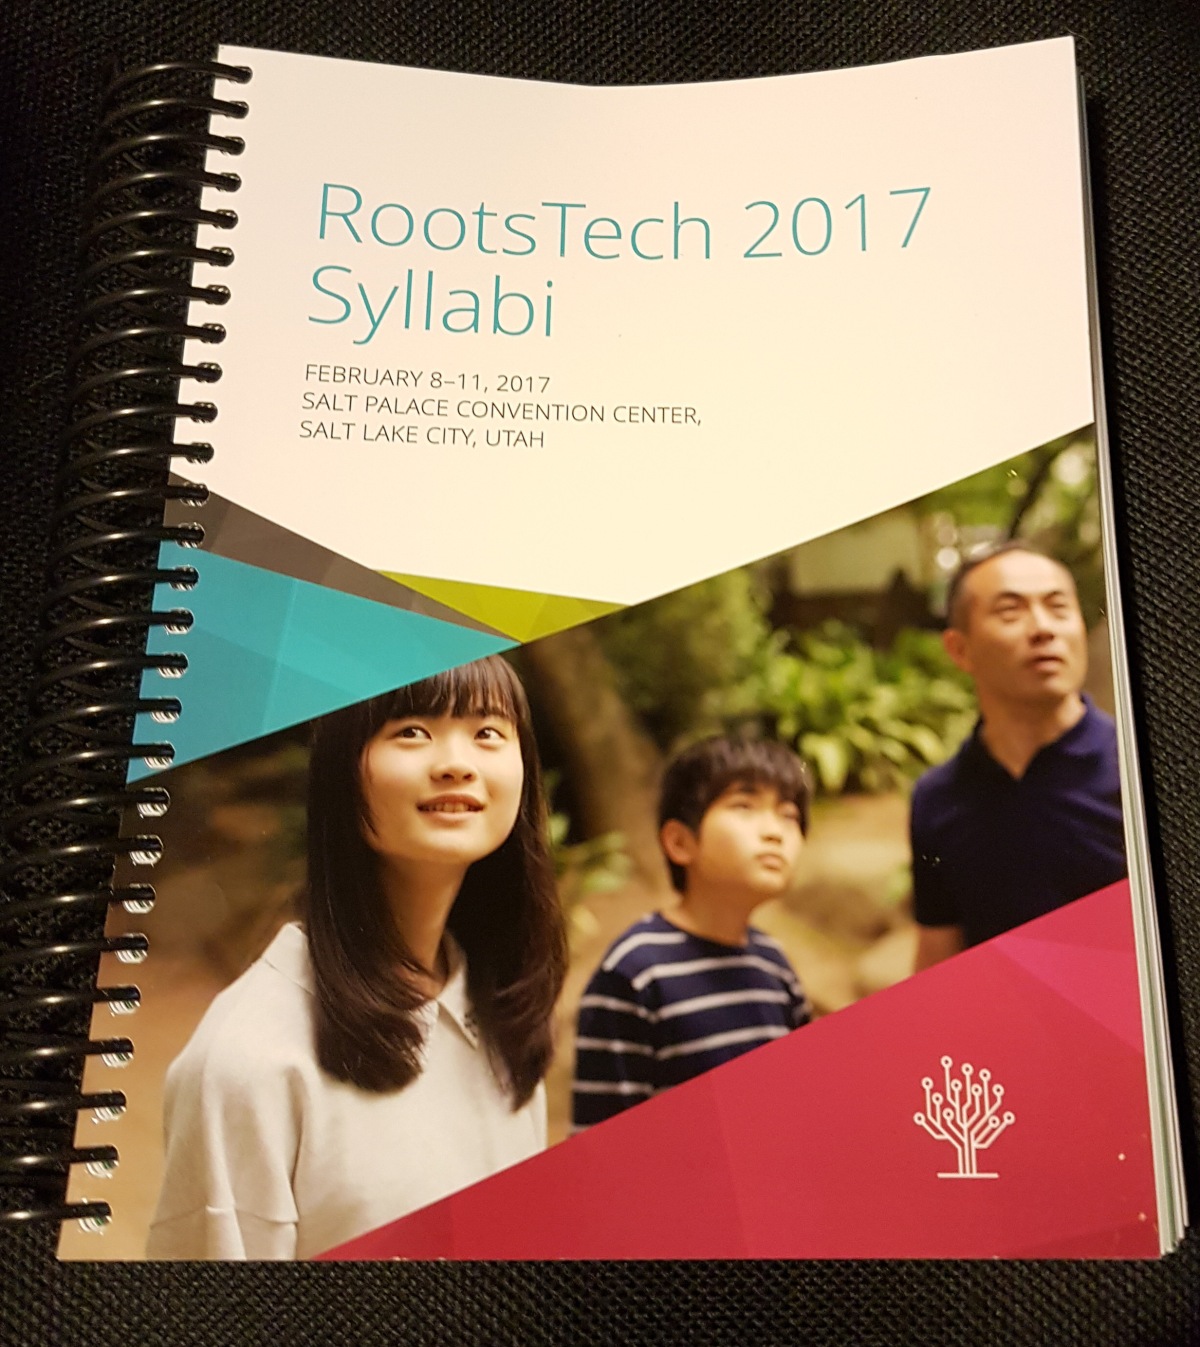 Reflections On Rootstech 2017